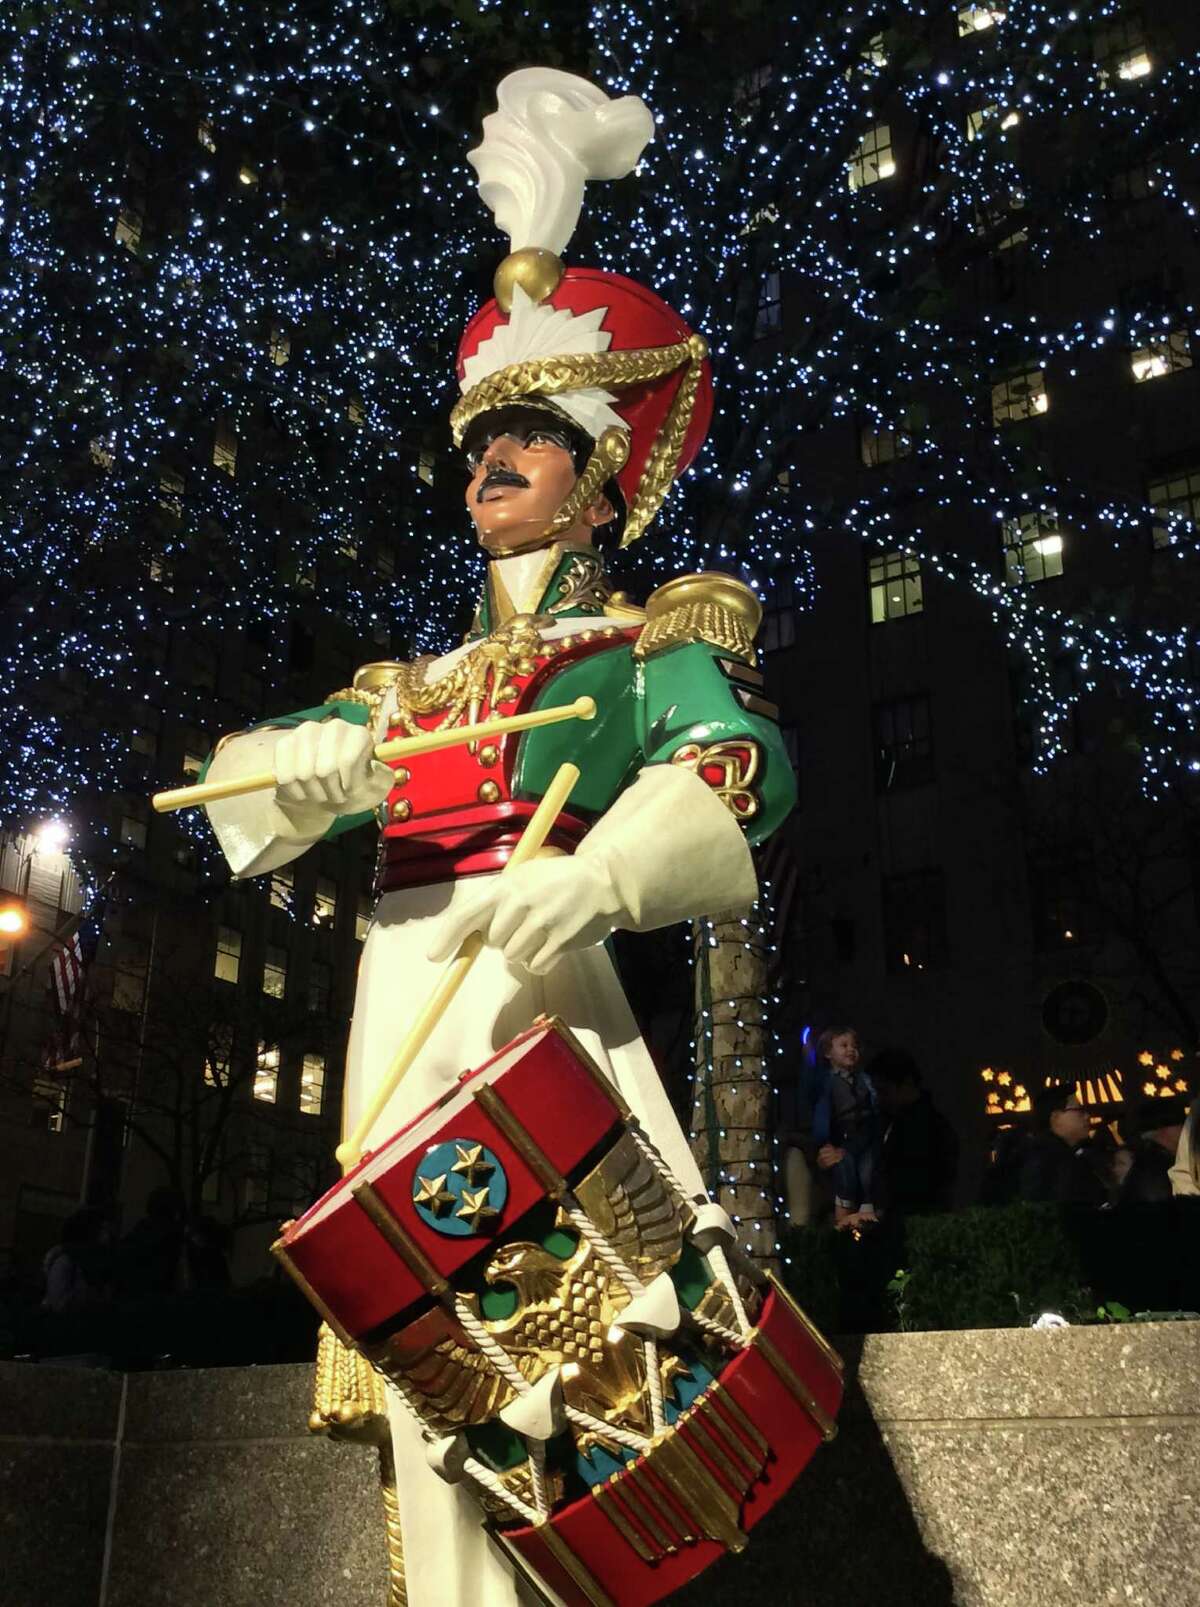 A drummer boy is spotted near the Rockefeller Center ice rink.